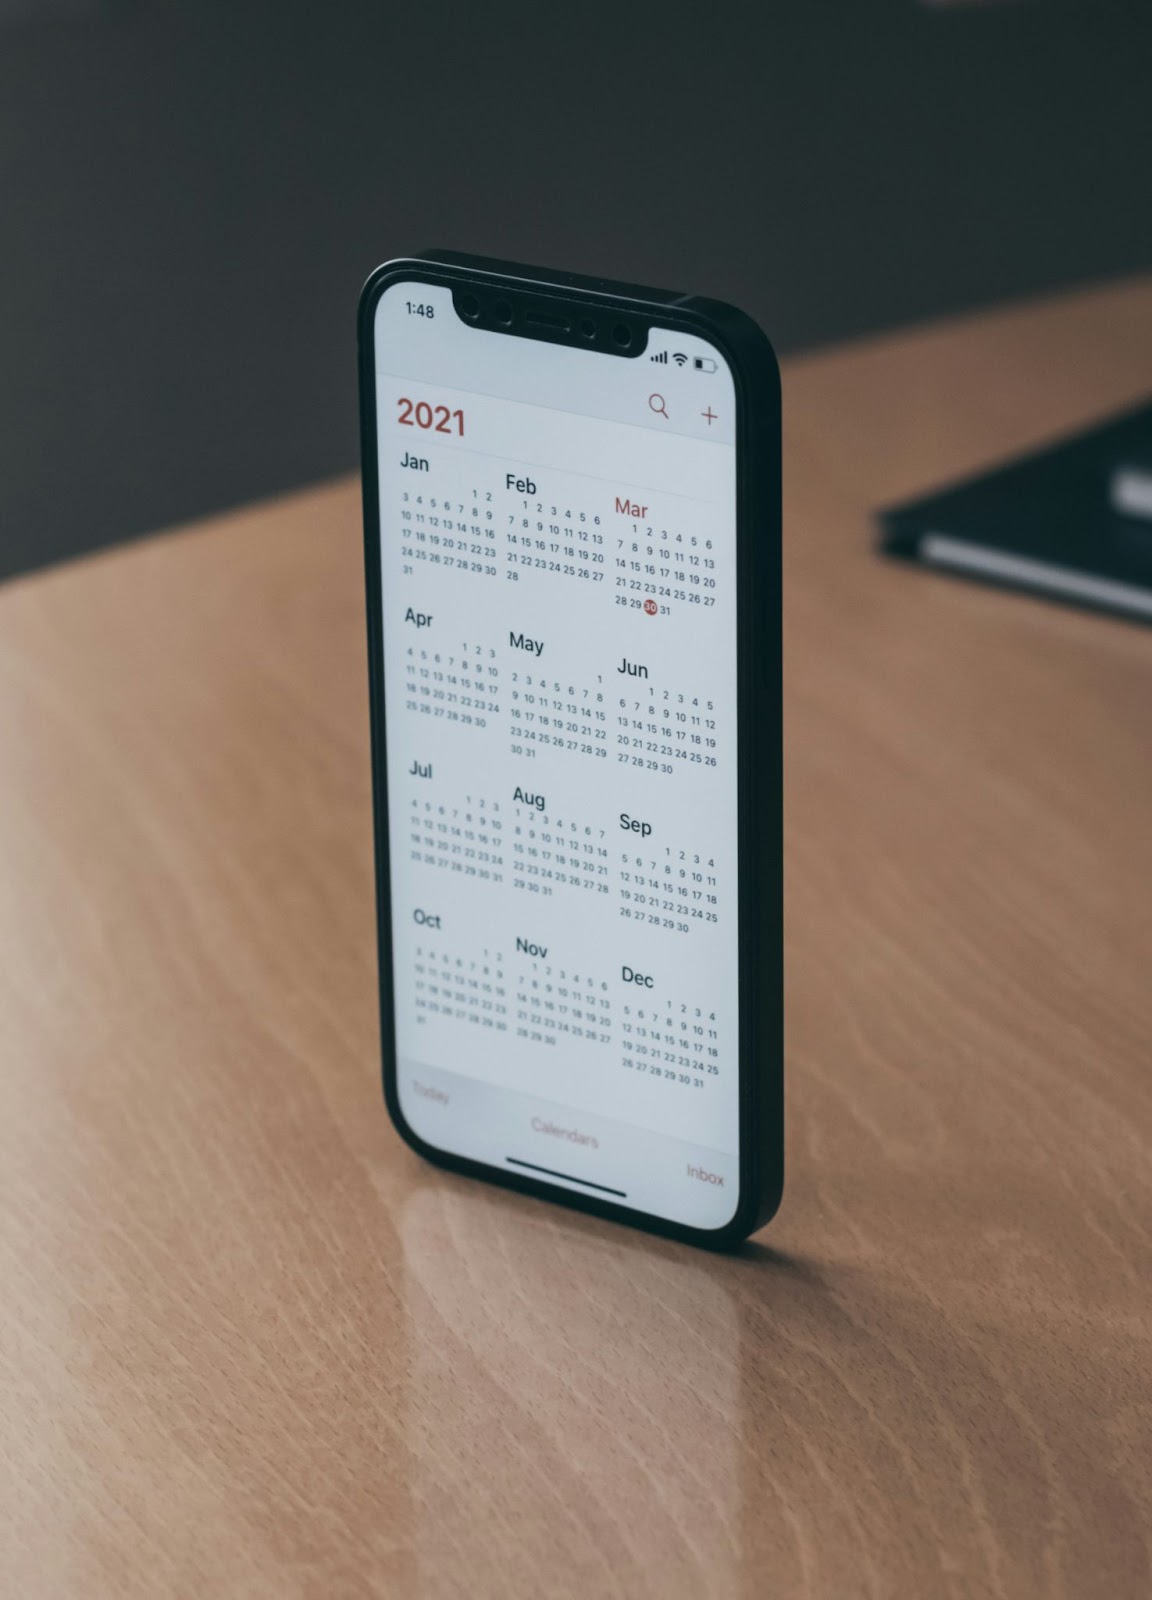 A phone balanced standing on a desk, showing the year 2021 month by month, day by day.